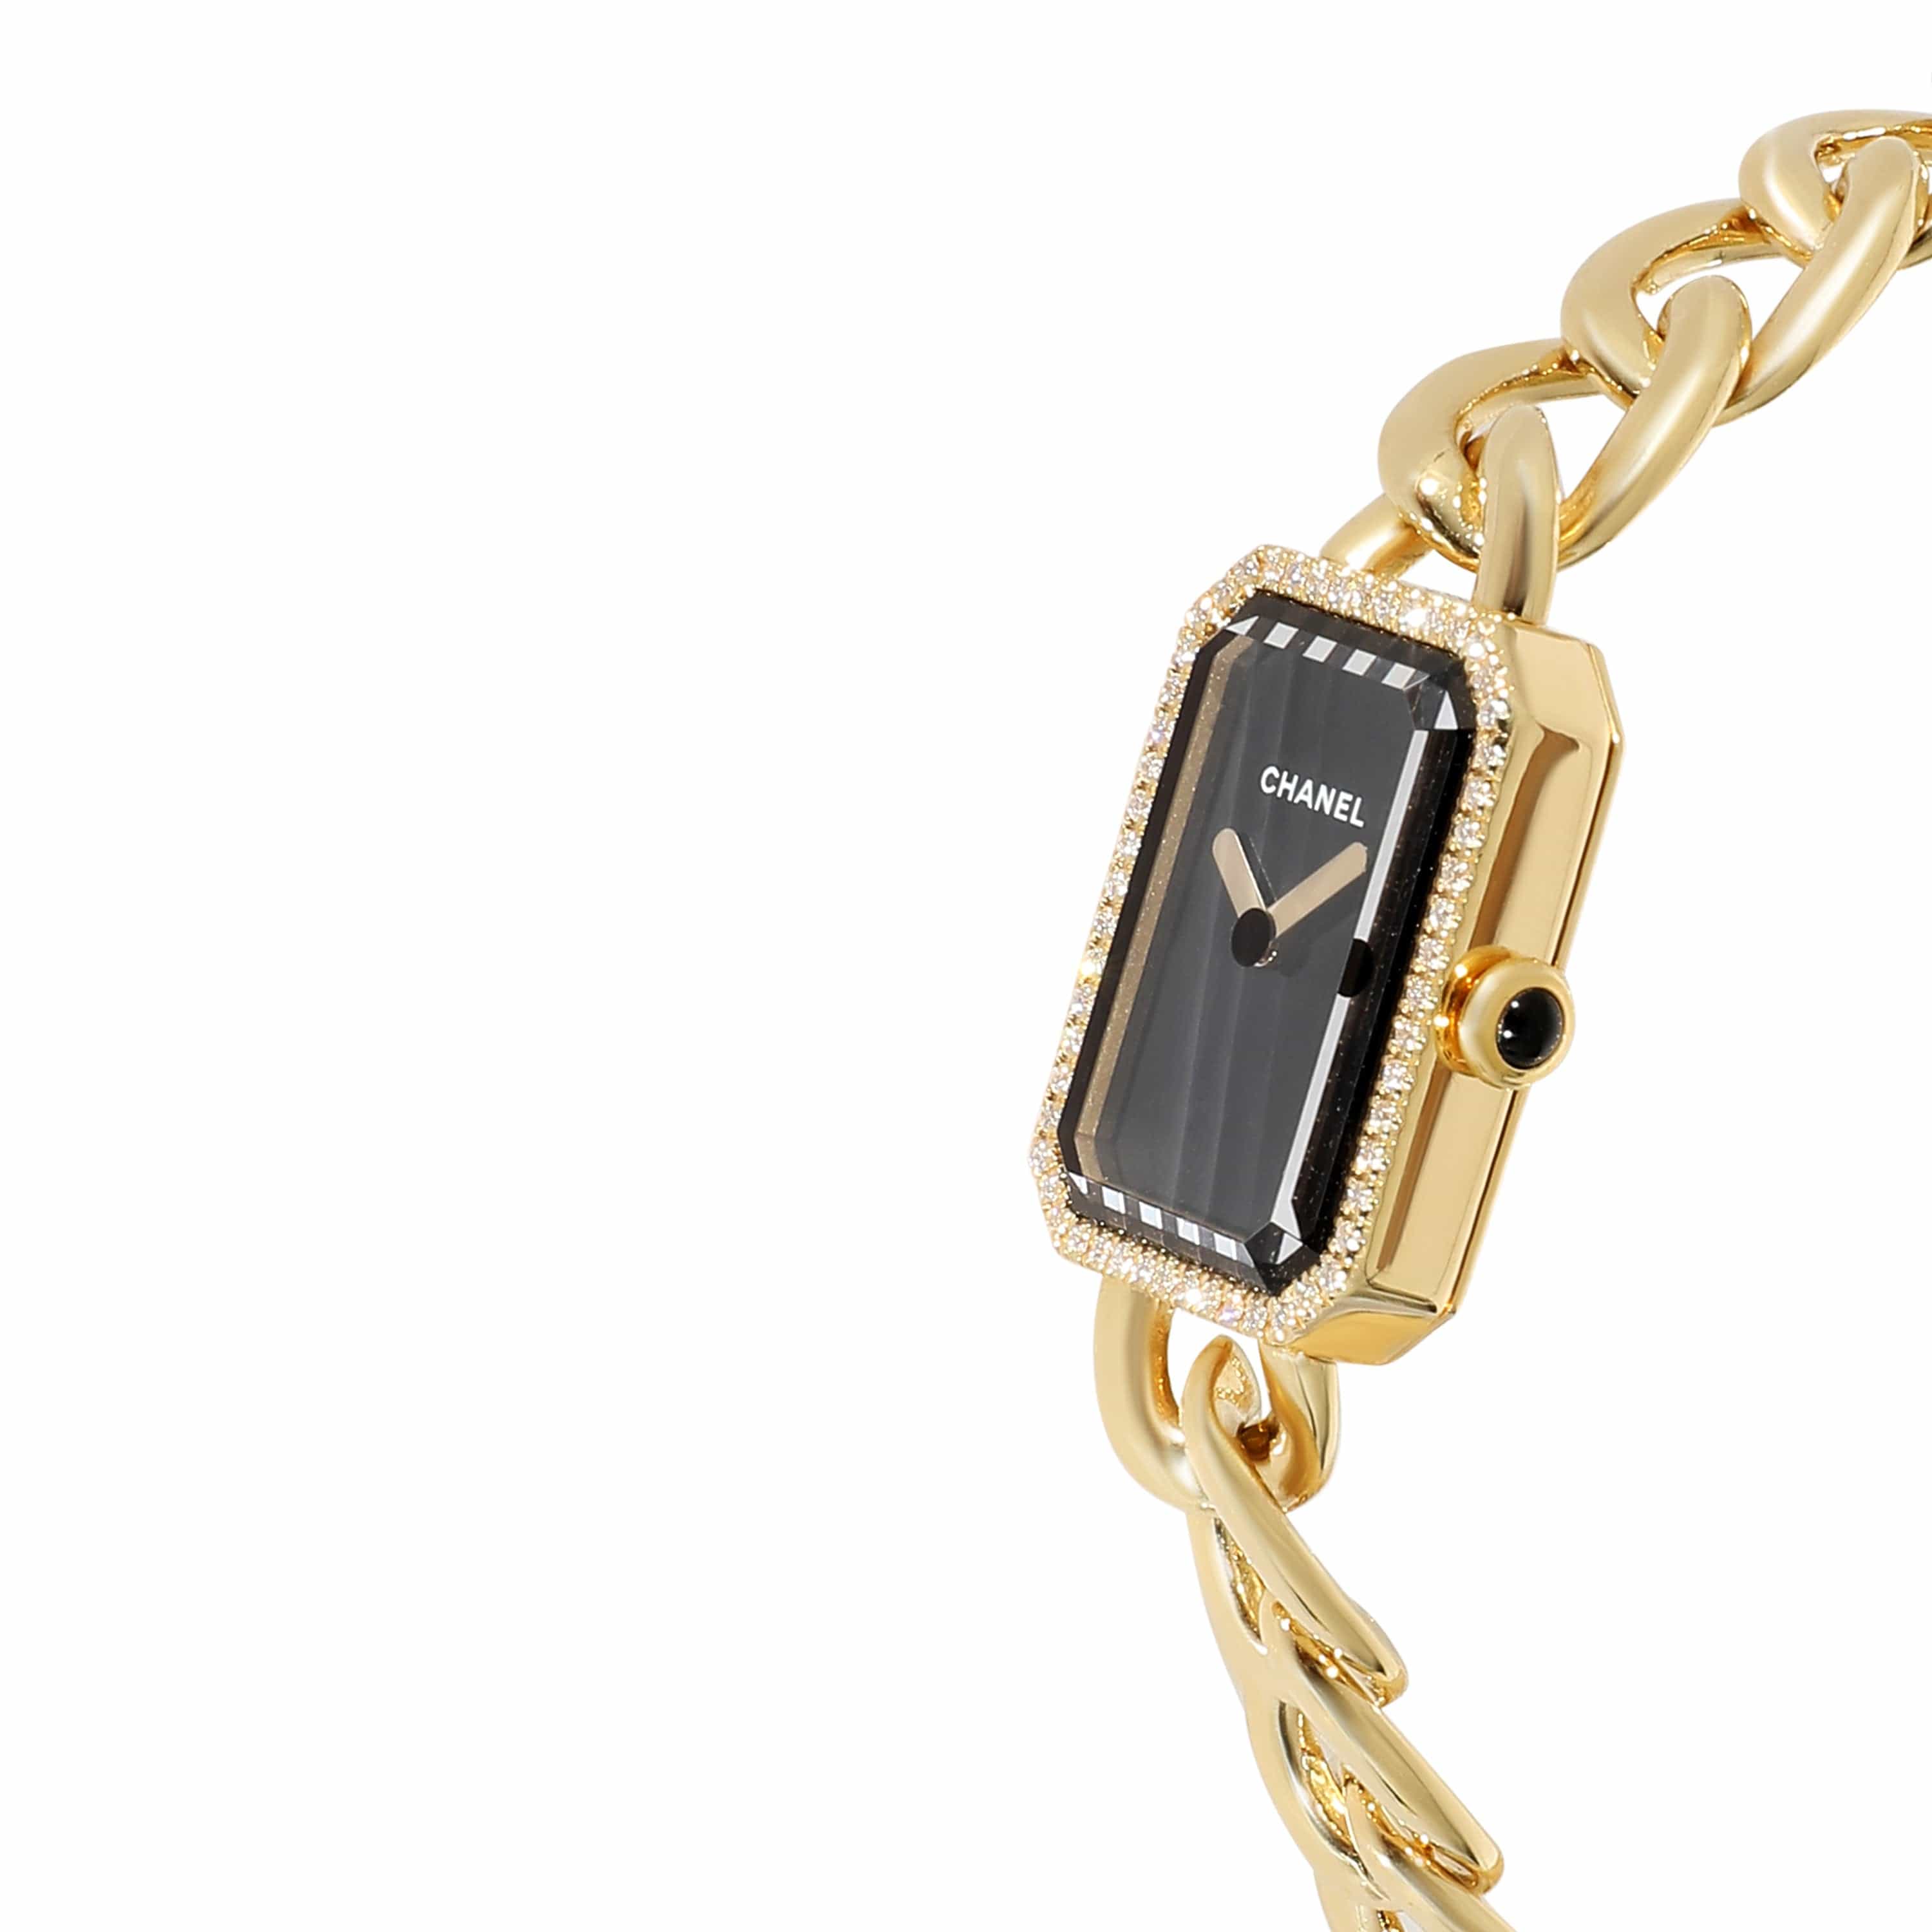 Chanel Chanel Premiere Chaine H03258 Women's Watch in 18kt Yellow Gold